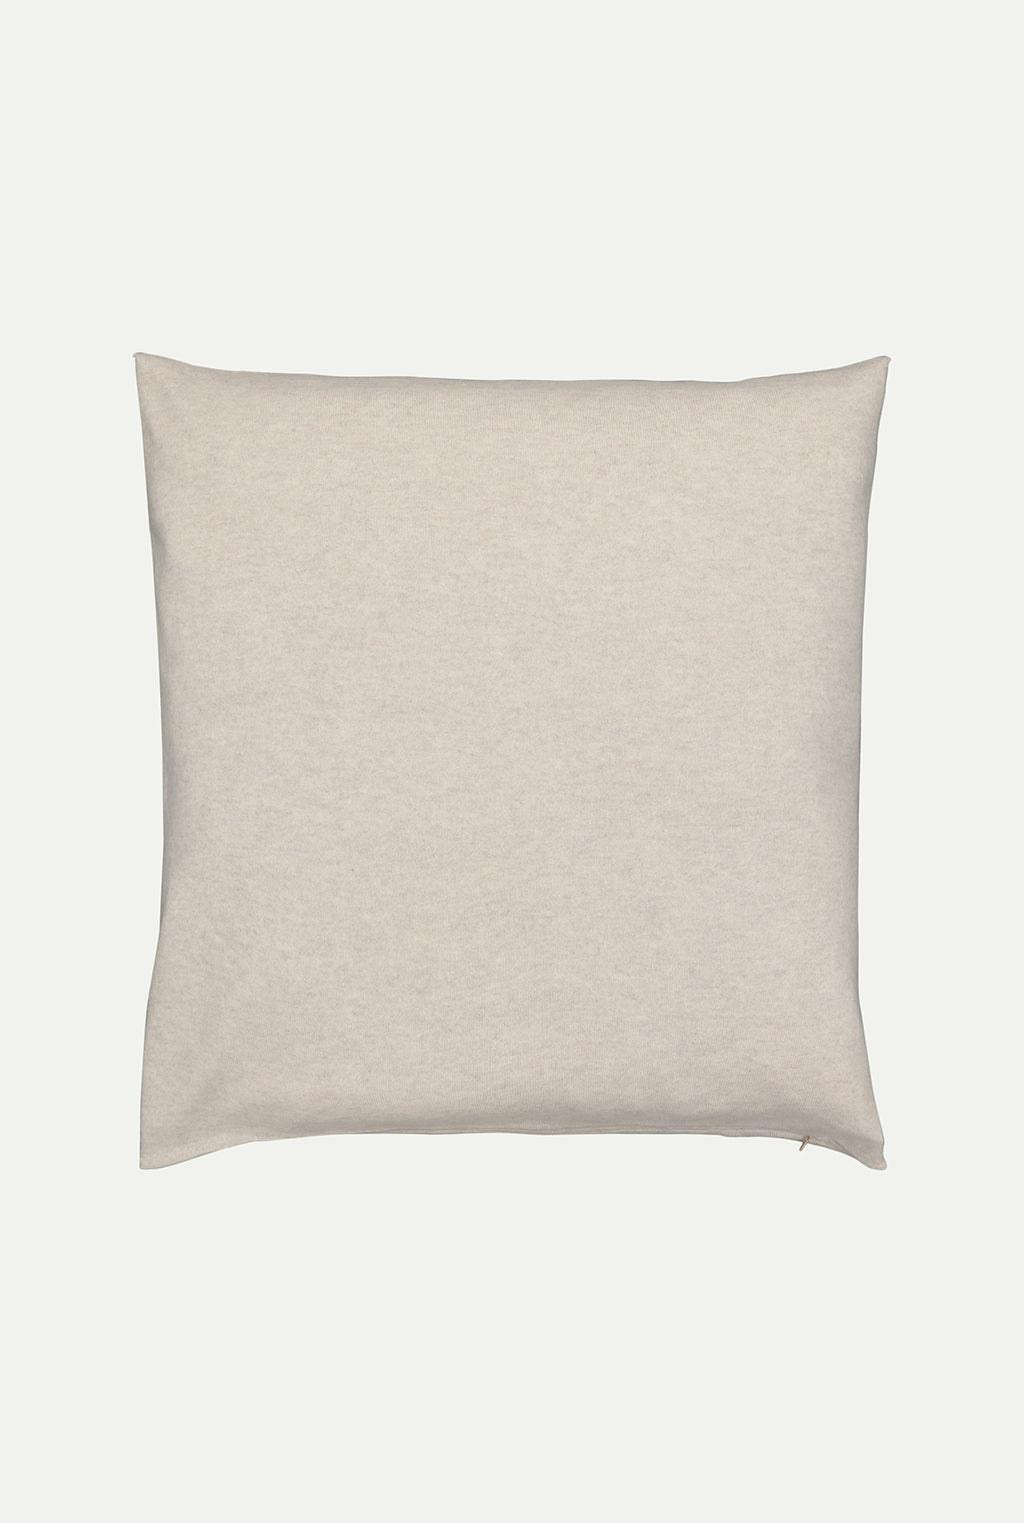 The SMALL CUSHION cashmere